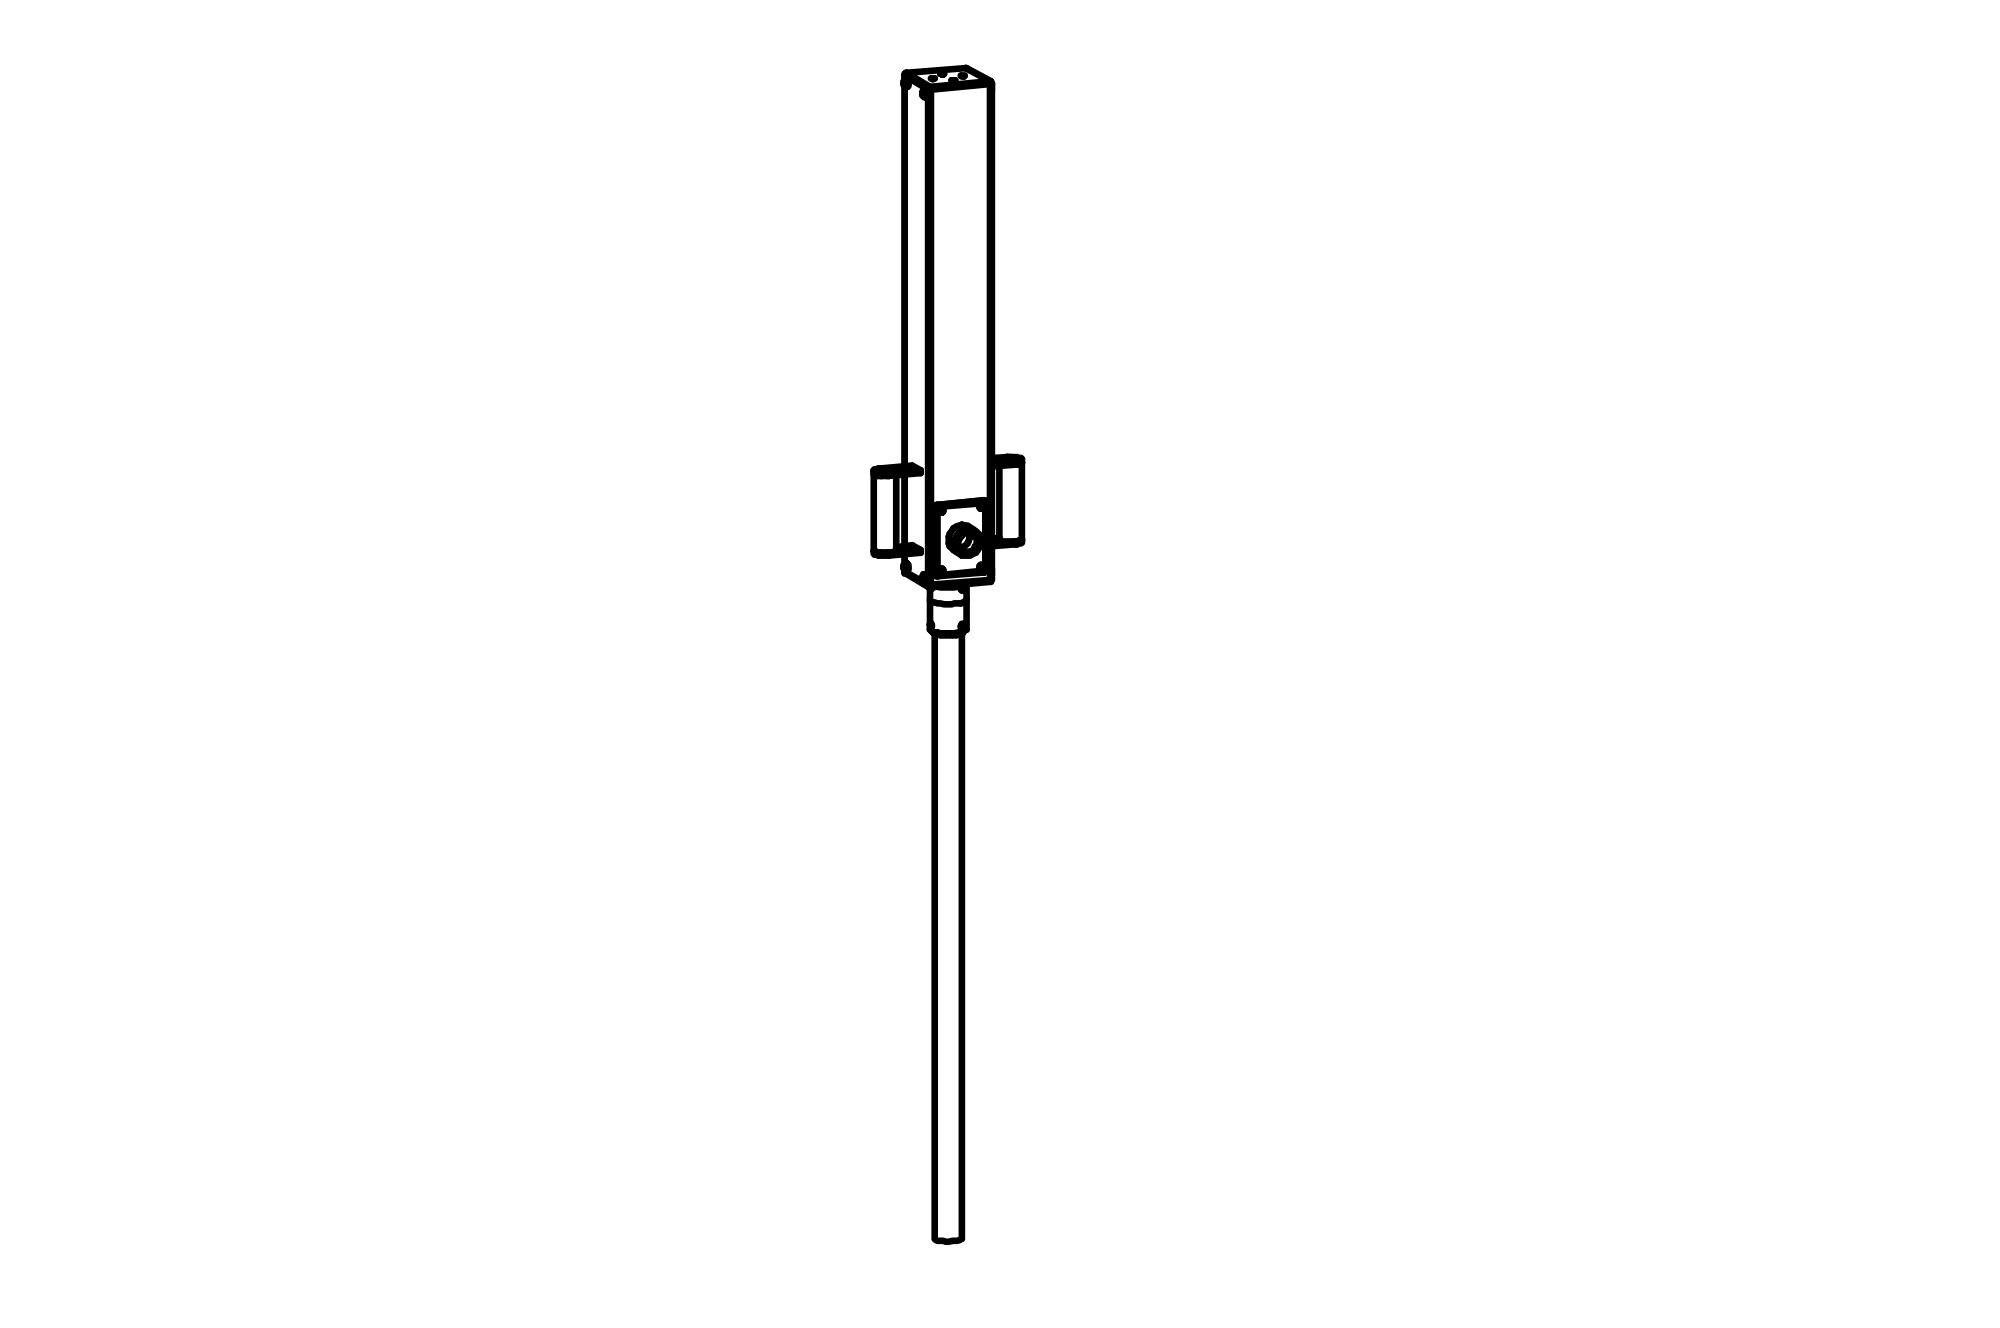 Periscope with a ground anchor and equipment made of stainless steel.